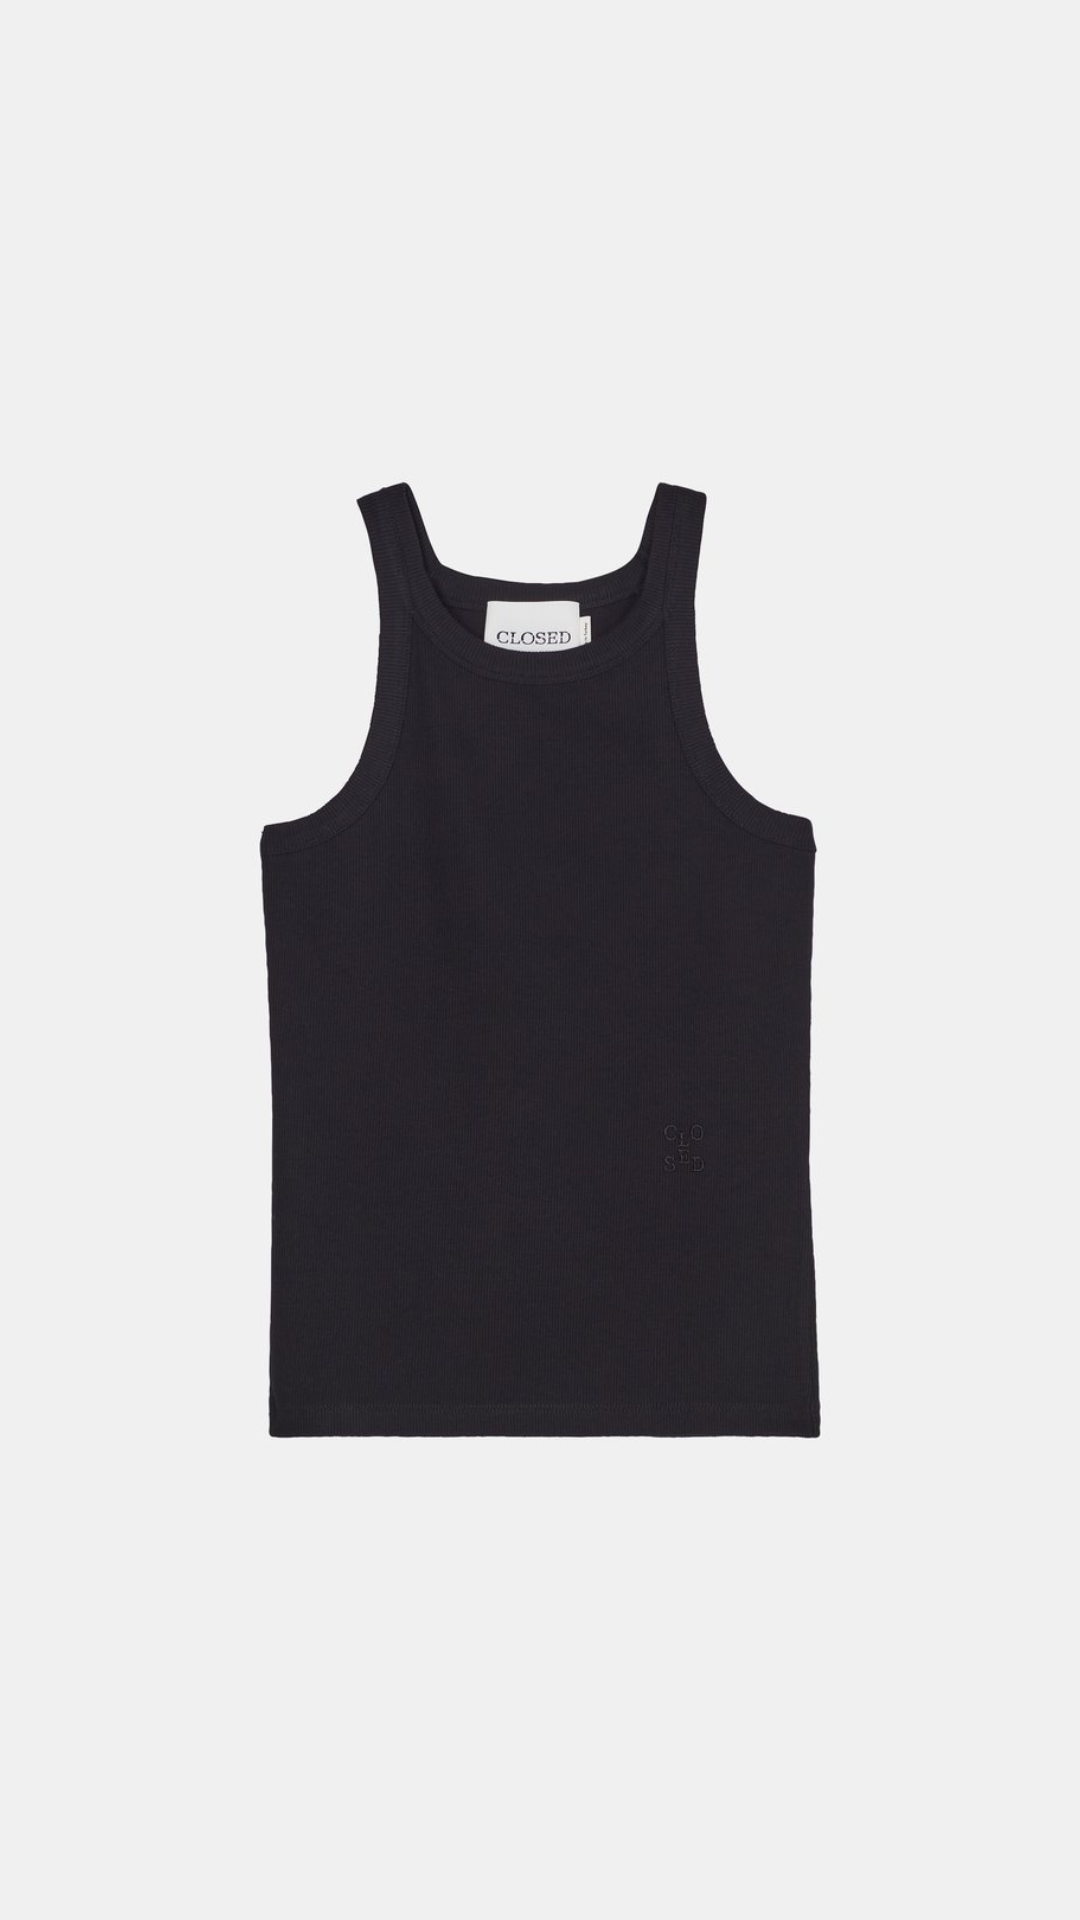 CLOSED Racer Top